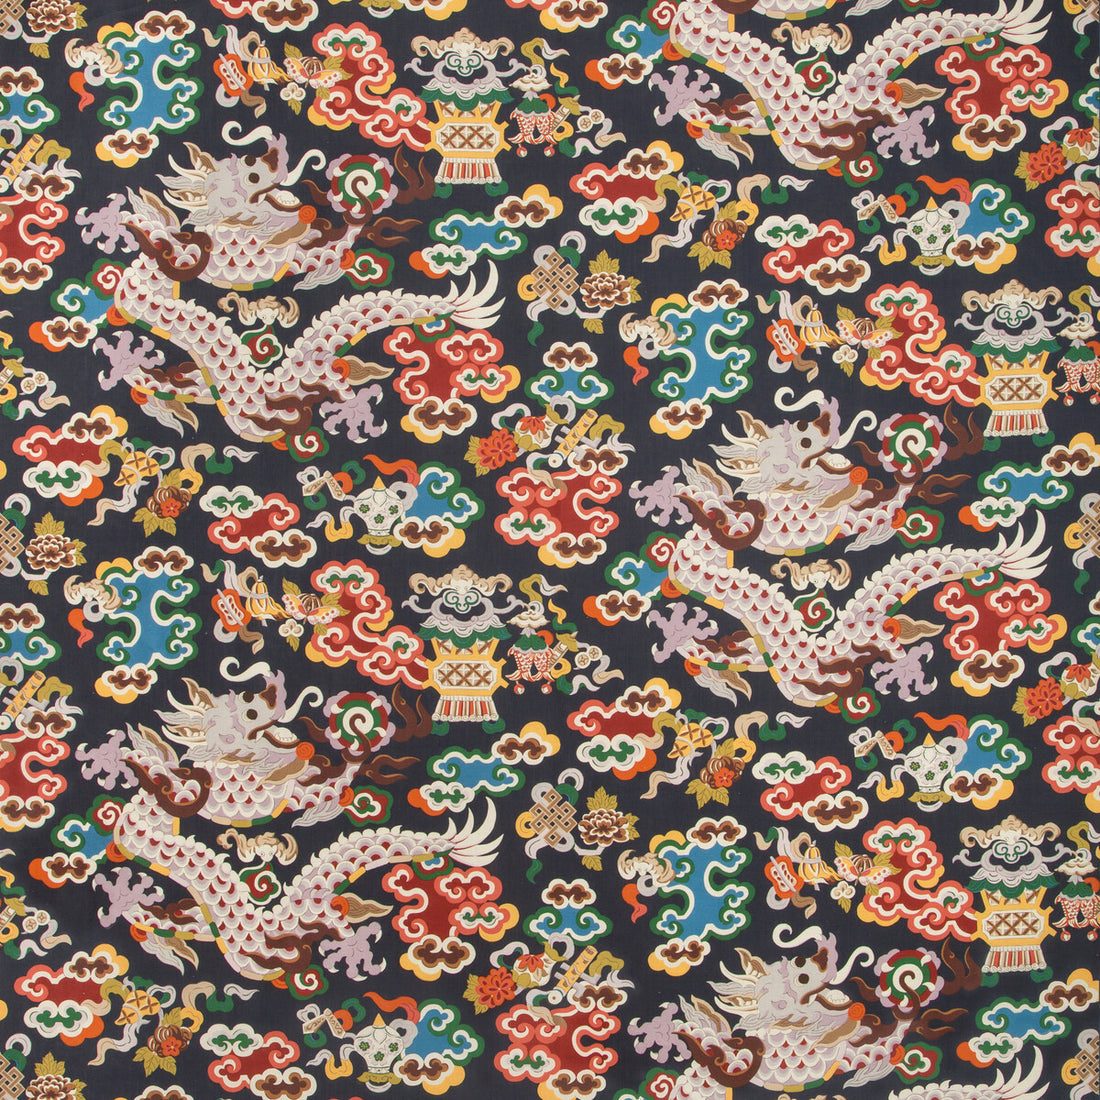 Ming Dragon Print fabric in indigo color - pattern 8019140.50.0 - by Brunschwig &amp; Fils in the Summer Palace collection